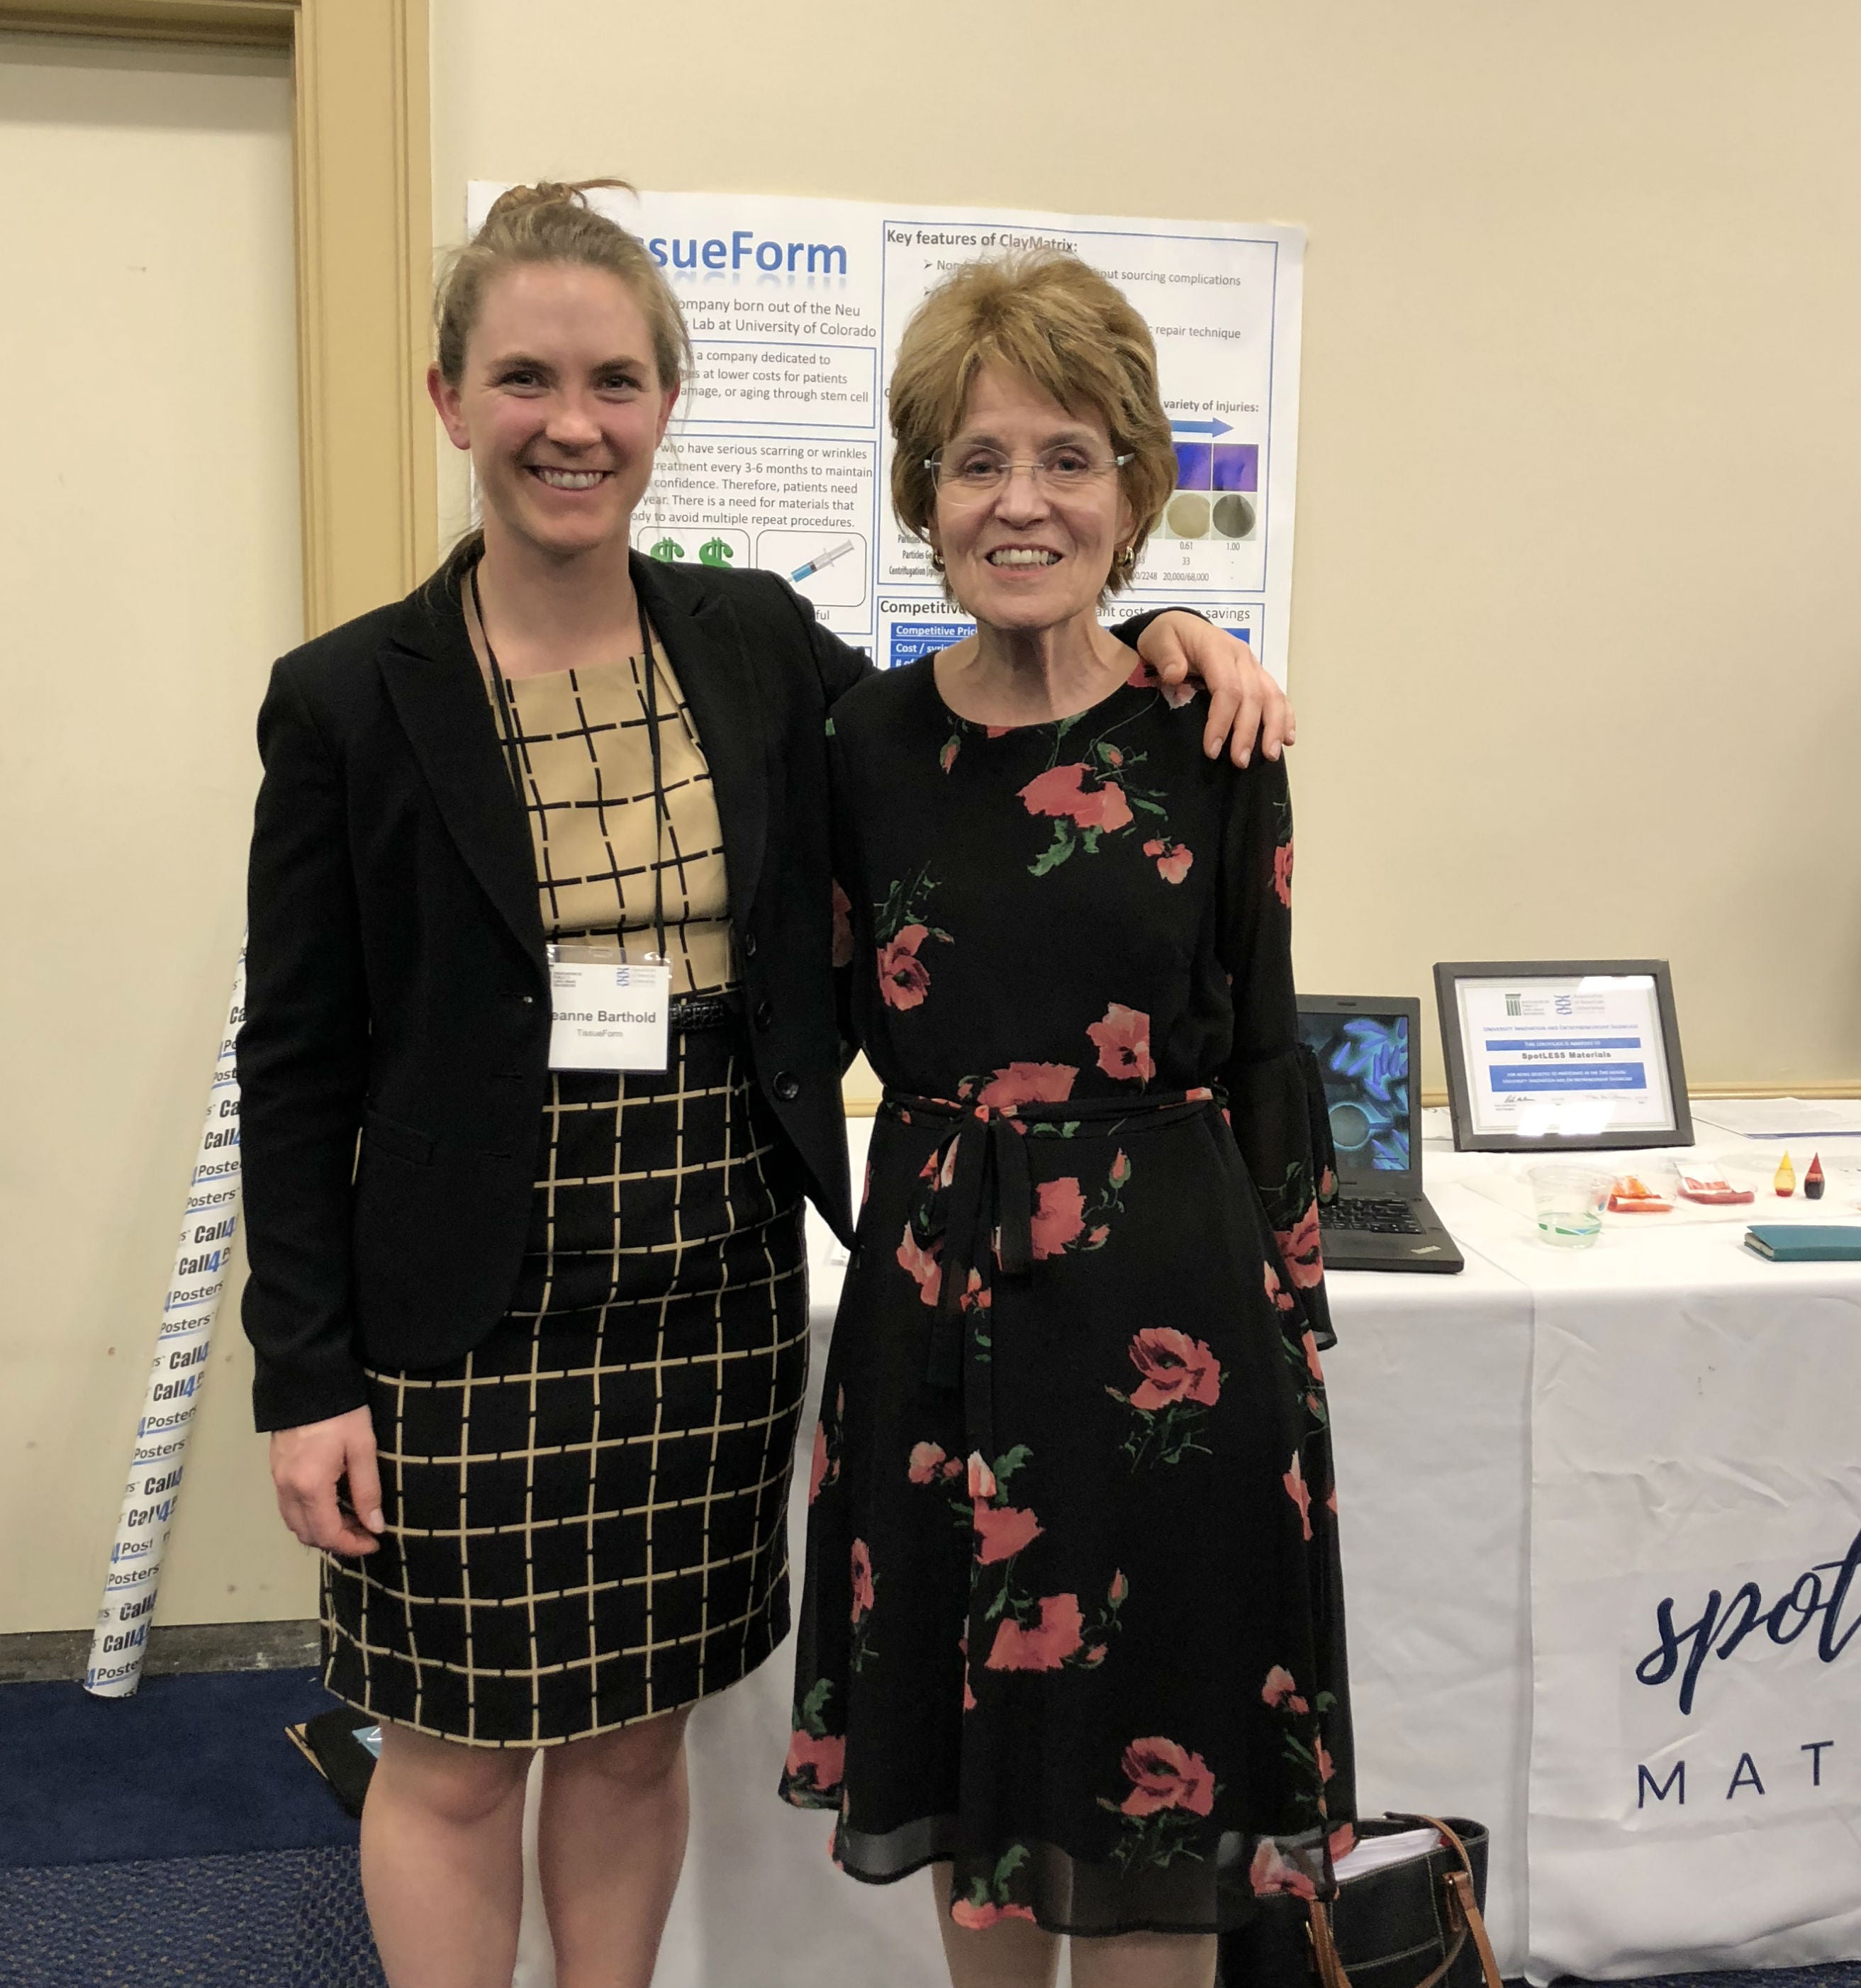 Jeanne Barthould, founder of TissueForm, and AAU President Mary Sue Coleman at the University Innovation & Entrepreneuership Showcase in DC